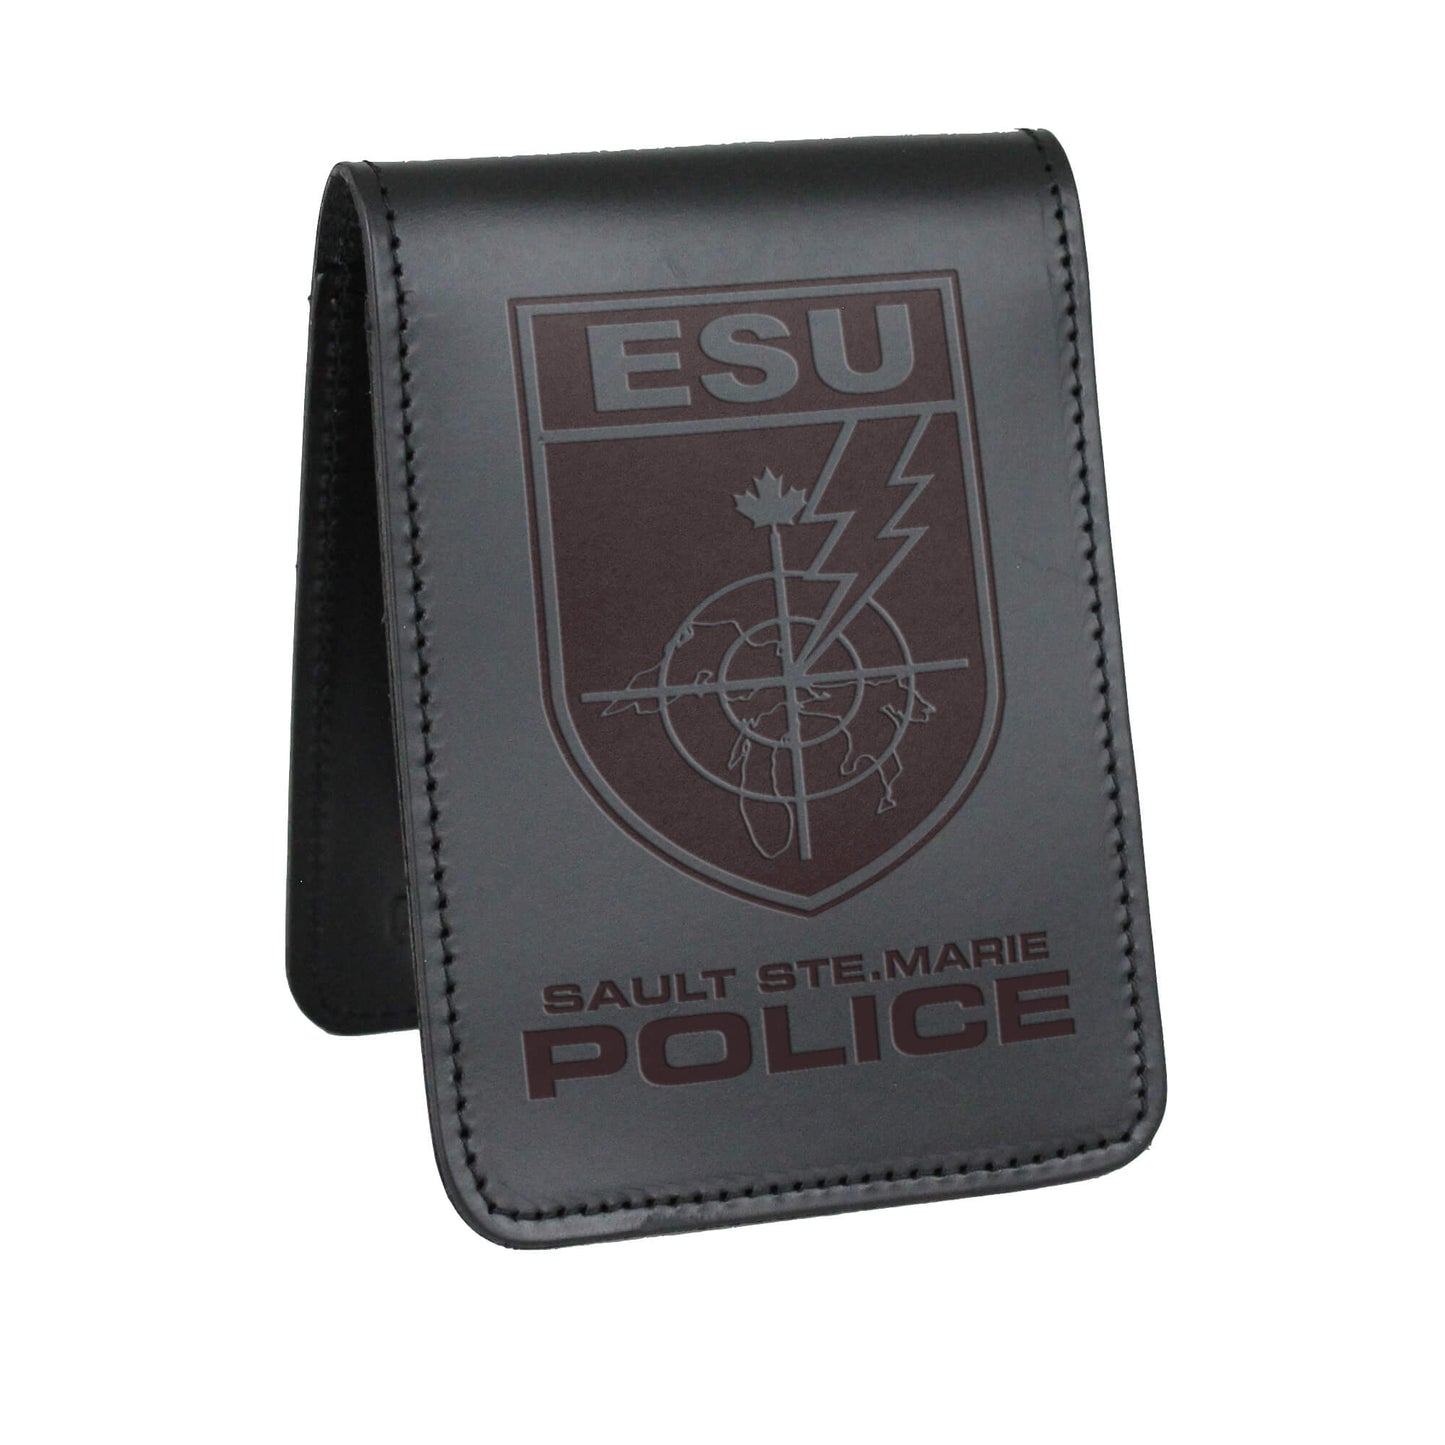 Sault Ste. Marie Police ESU Notebook Cover-Perfect Fit-911 Duty Gear Canada